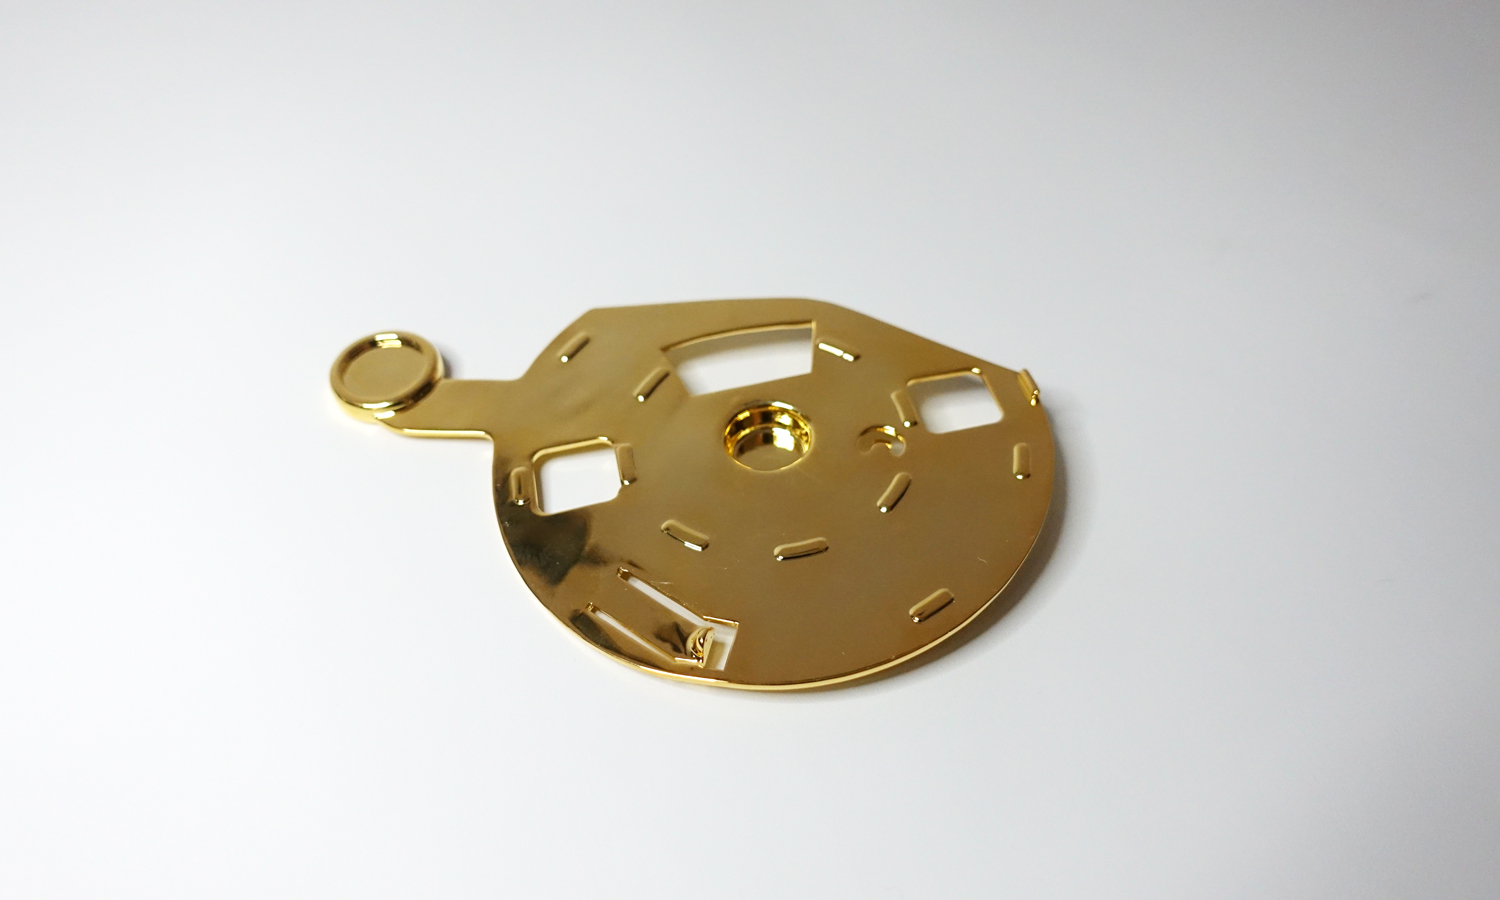 DMLS 3D Printed 18K Gold Plated Brass Sample. Source: FacFox